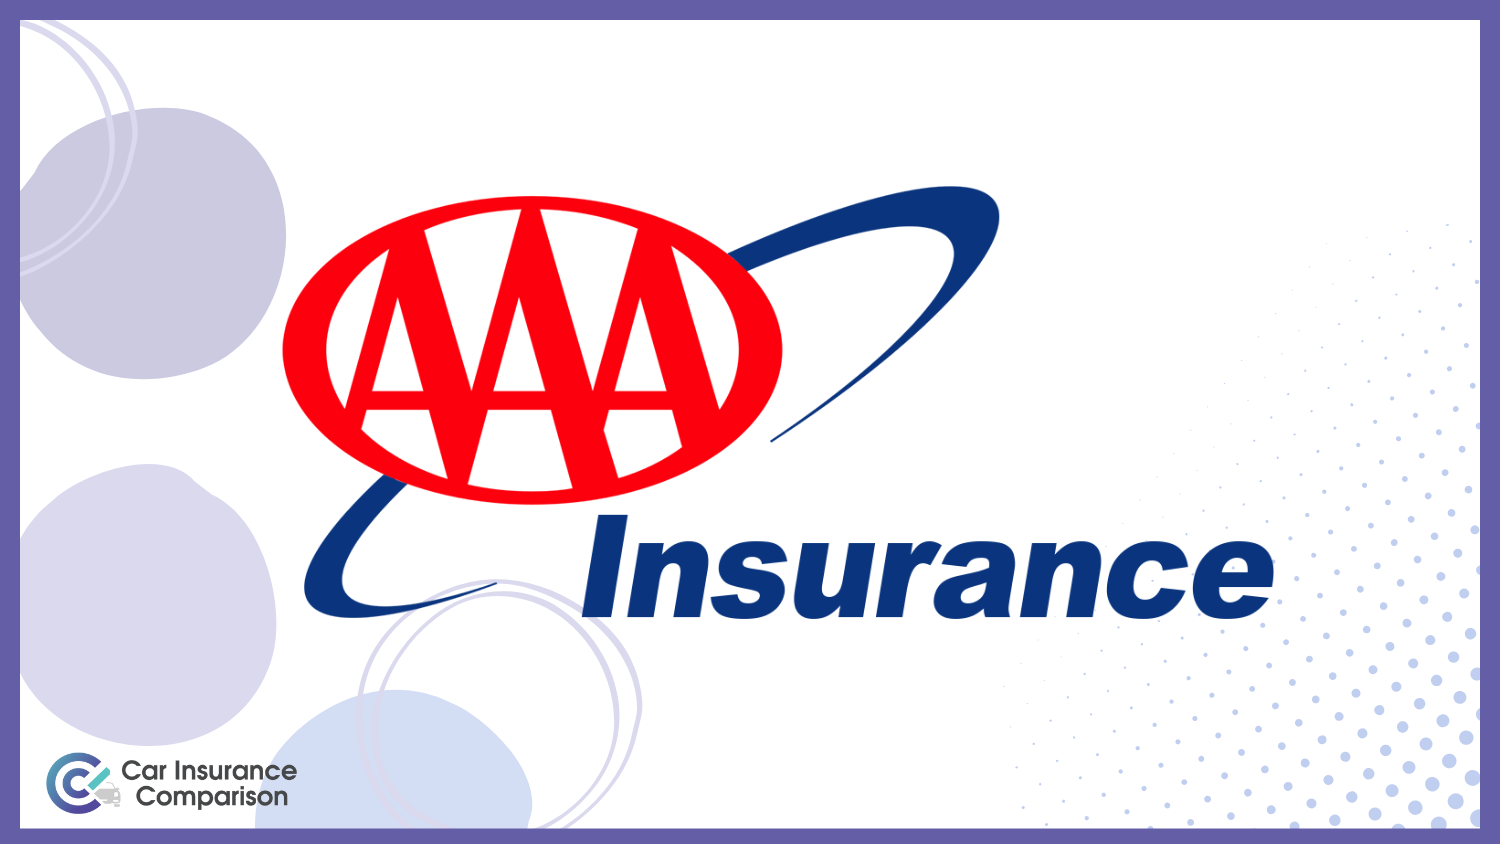 AAA: Best Car Insurance for Real Estate Agents